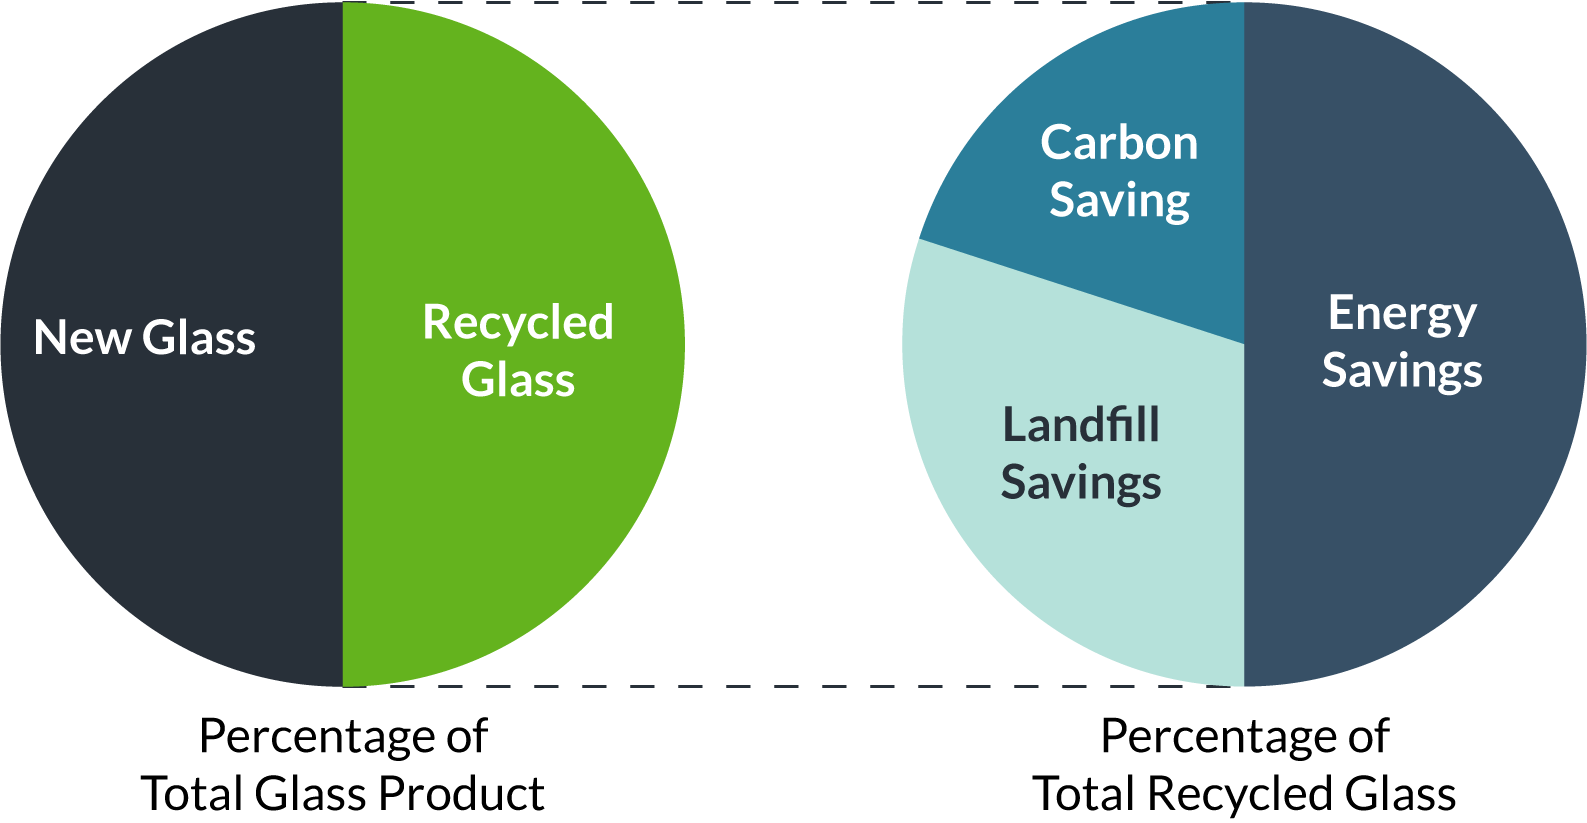 It is projected that LumaSort will make it so 50% of glass produced will be from recycled glass. This will result in an impact of 10% landfill savings, 15% energy savings, and 25% carbon savings